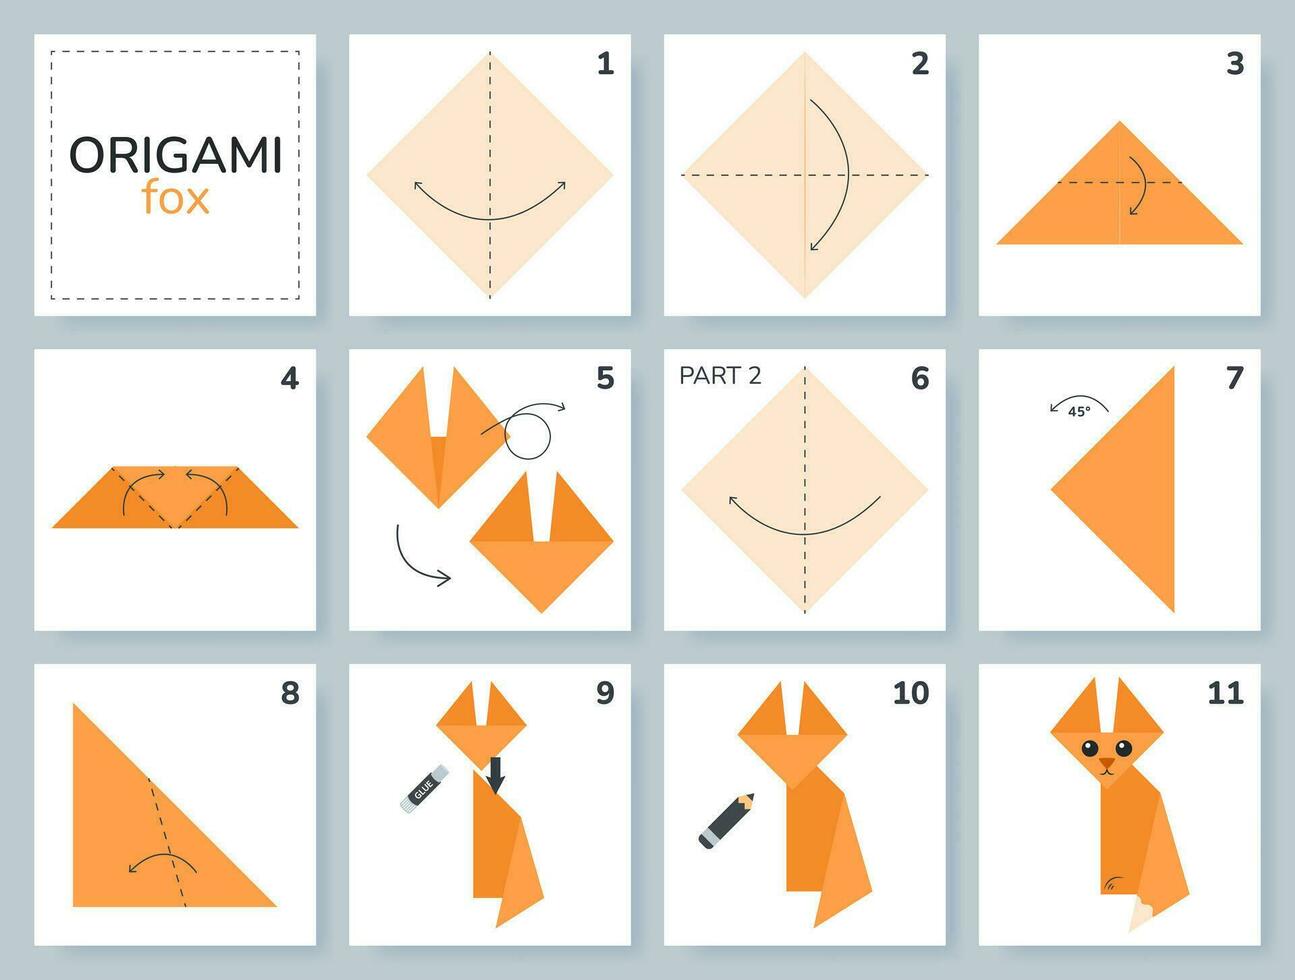 Fox origami scheme tutorial moving model. Origami for kids. Step by step how to make a cute origami fox. Vector illustration.